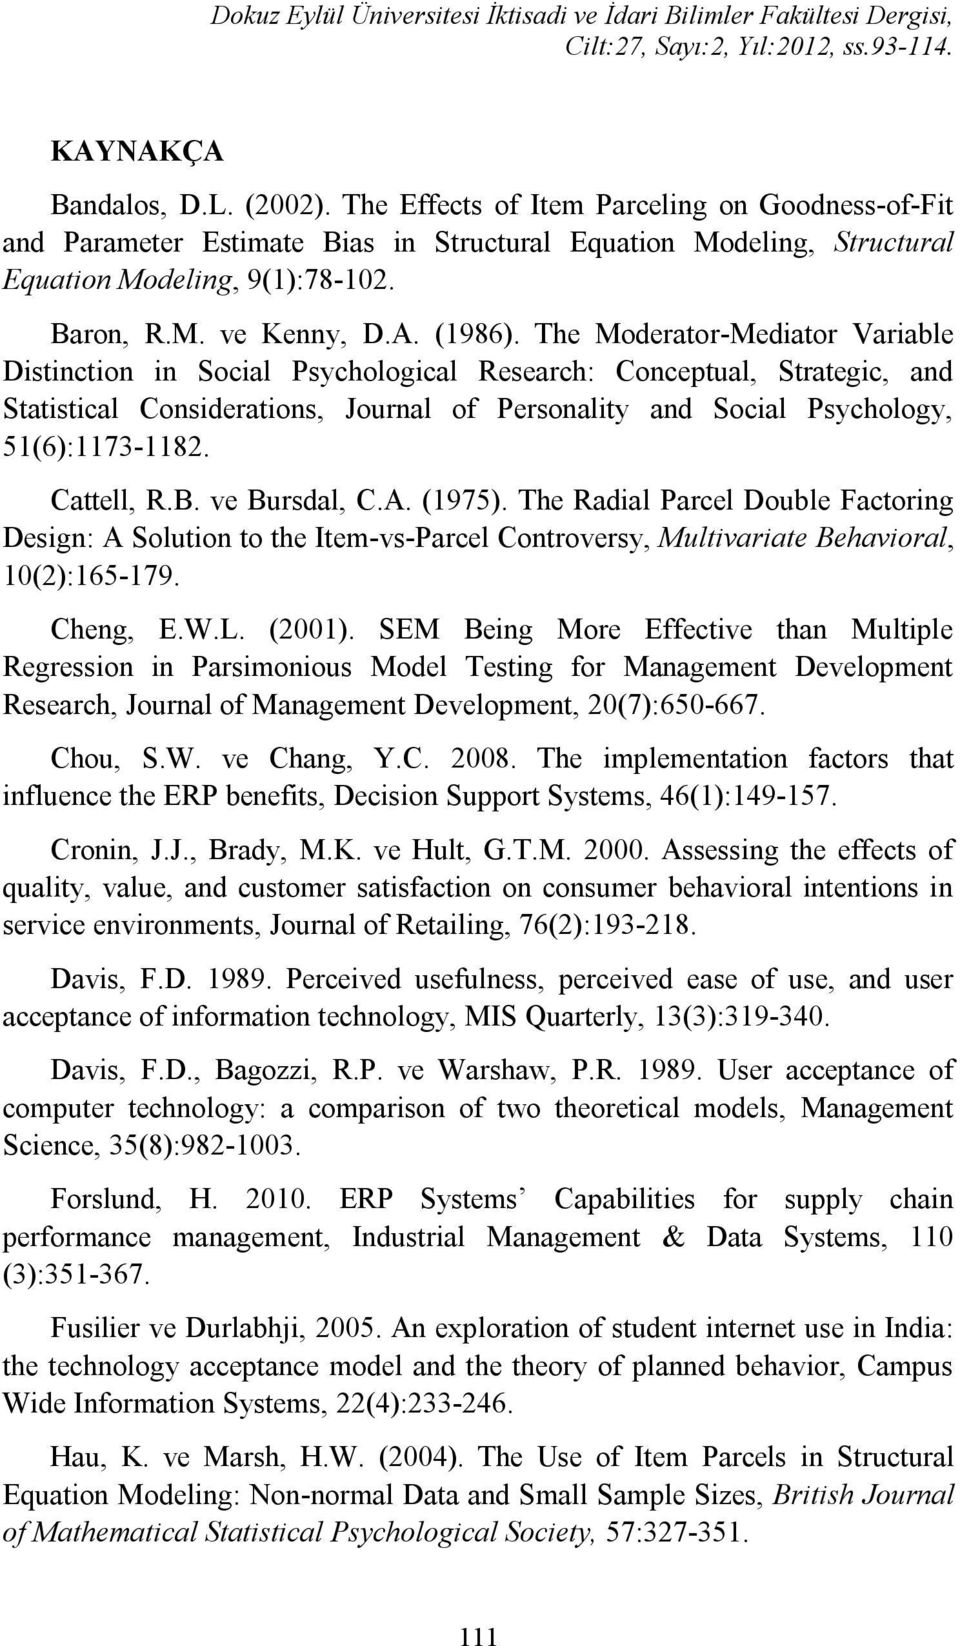 The Moderator-Mediator Variable Distinction in Social Psychological Research: Conceptual, Strategic, and Statistical Considerations, Journal of Personality and Social Psychology, 51(6):1173-1182.